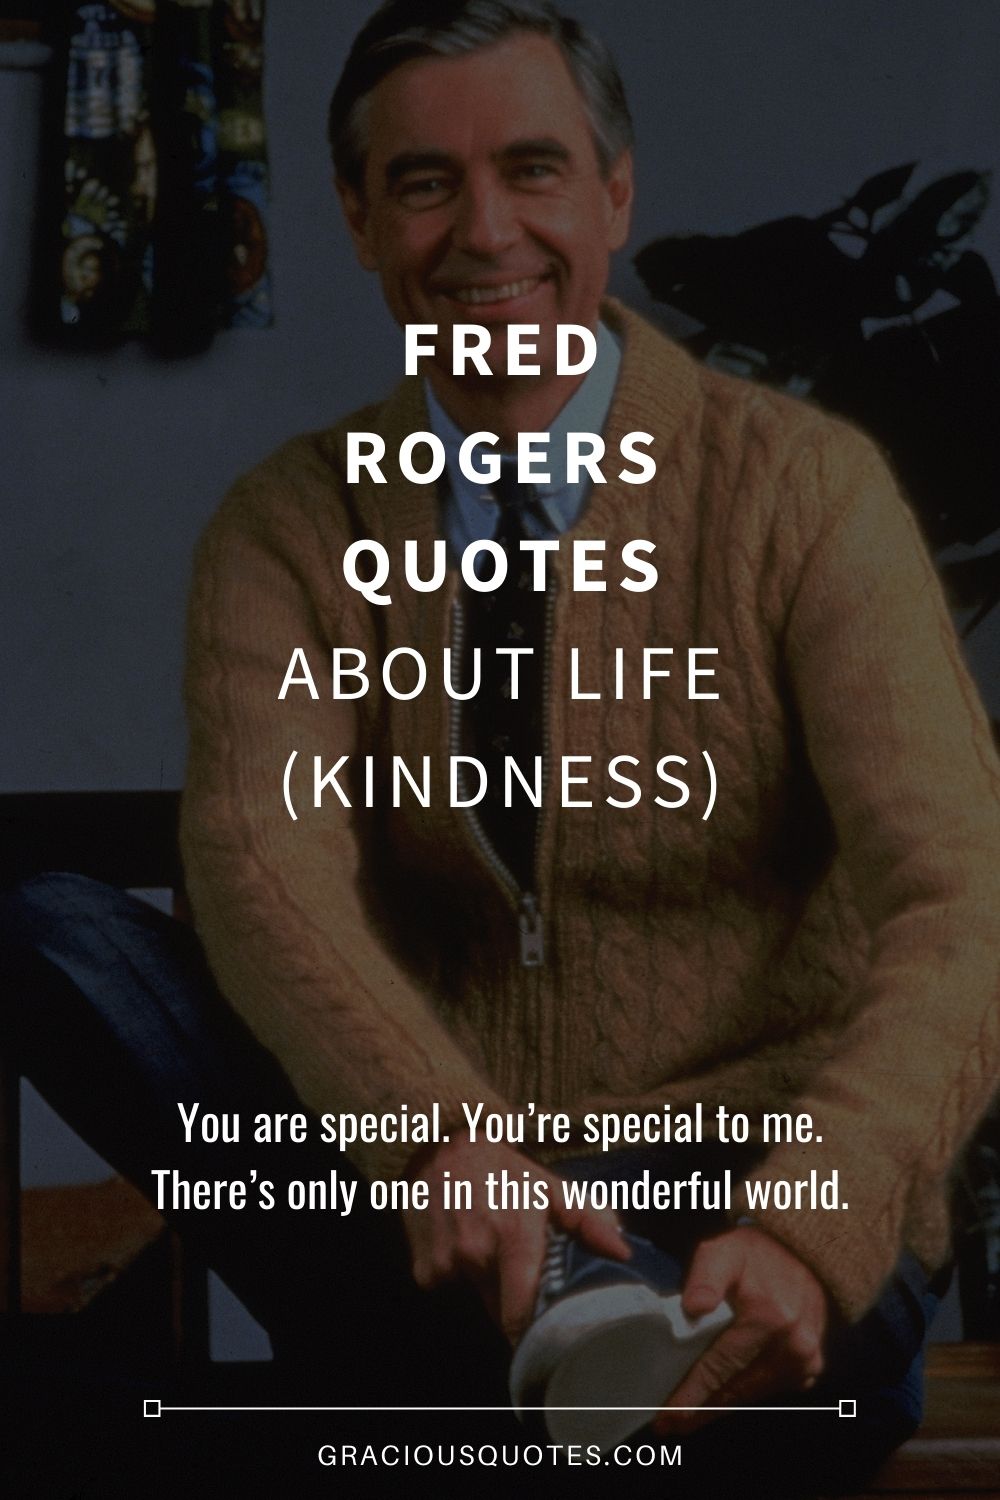 Fred Rogers Quotes About Life (KINDNESS) - Gracious Quotes